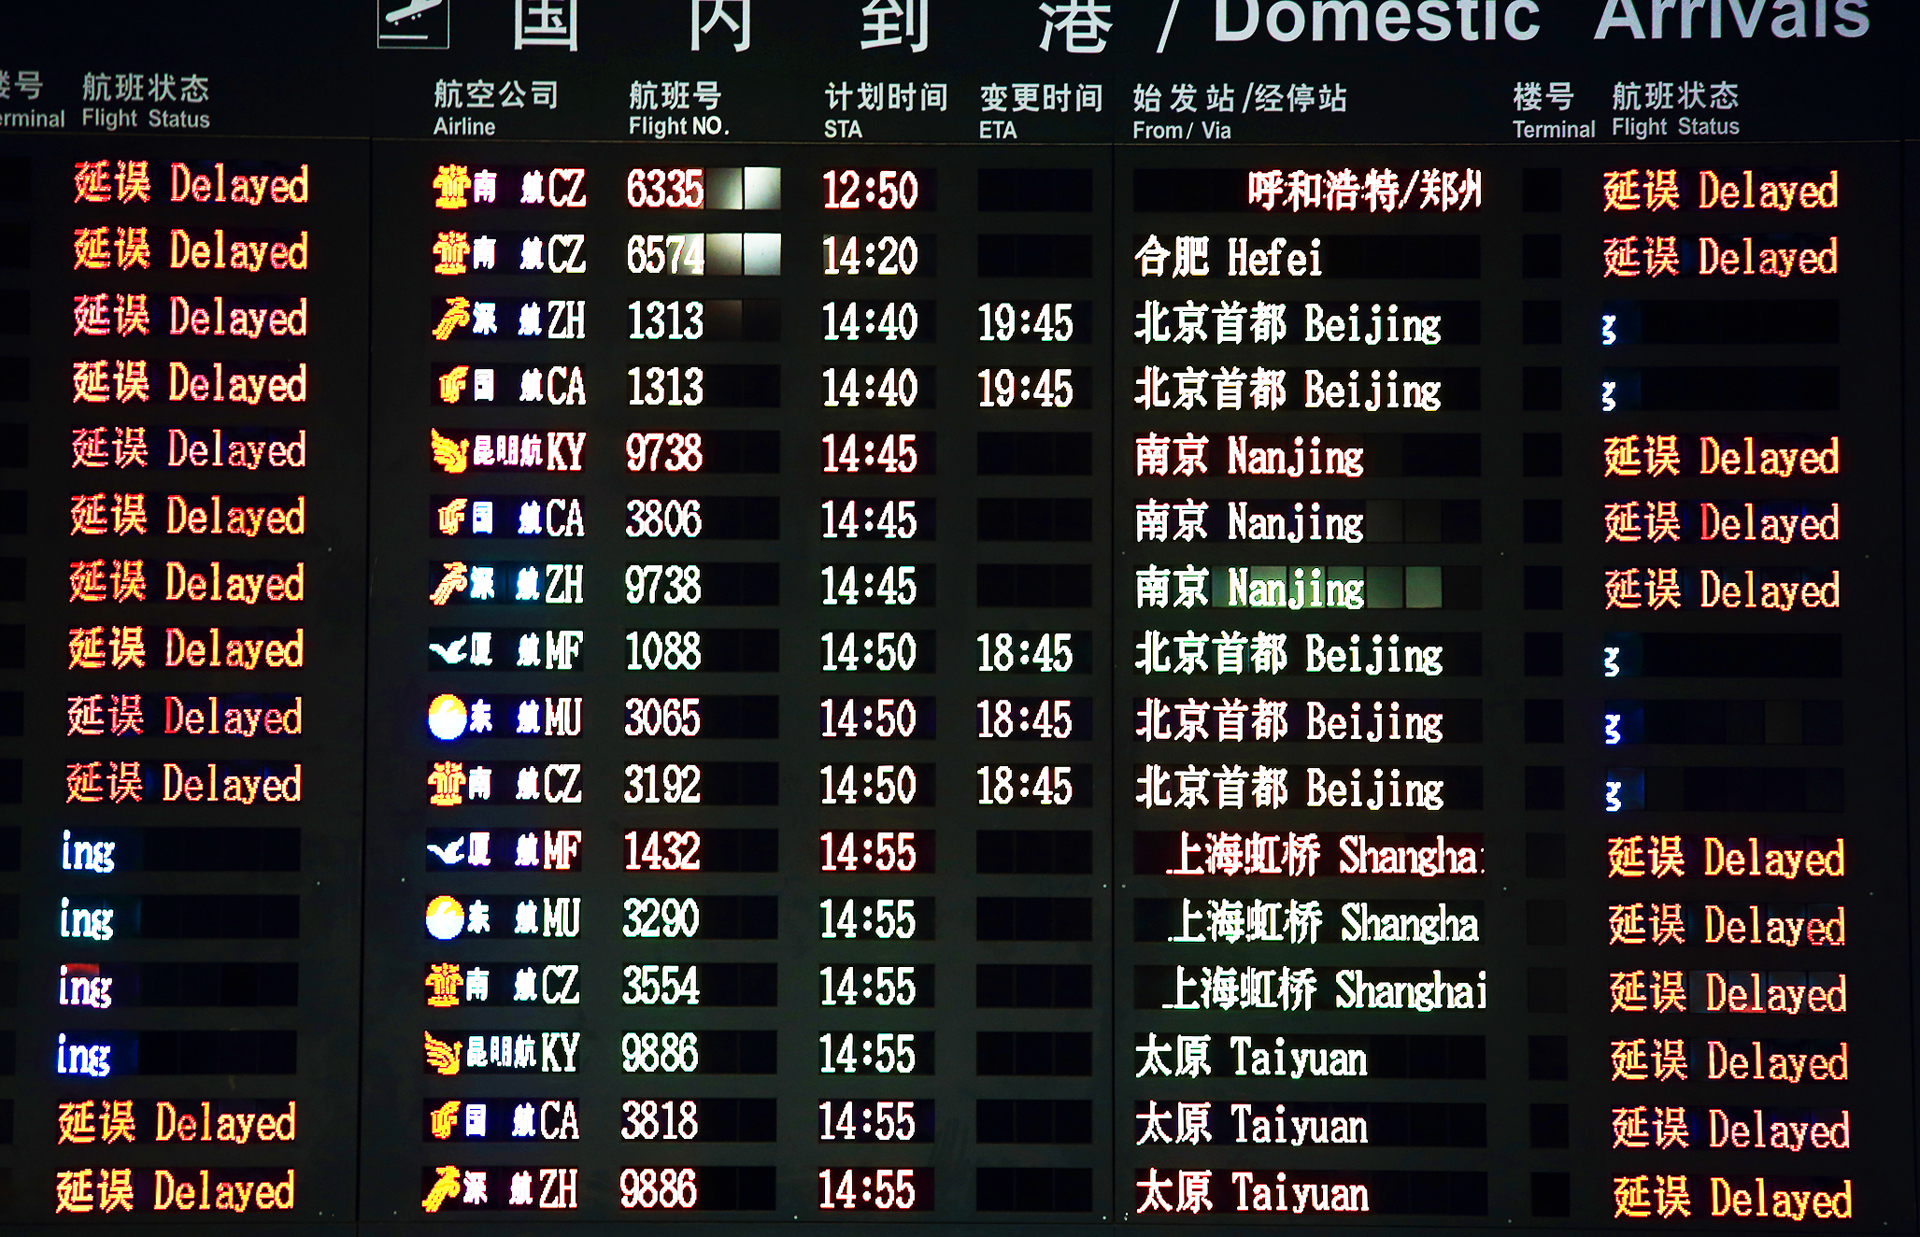 Where can you find flight schedules listed by airport?